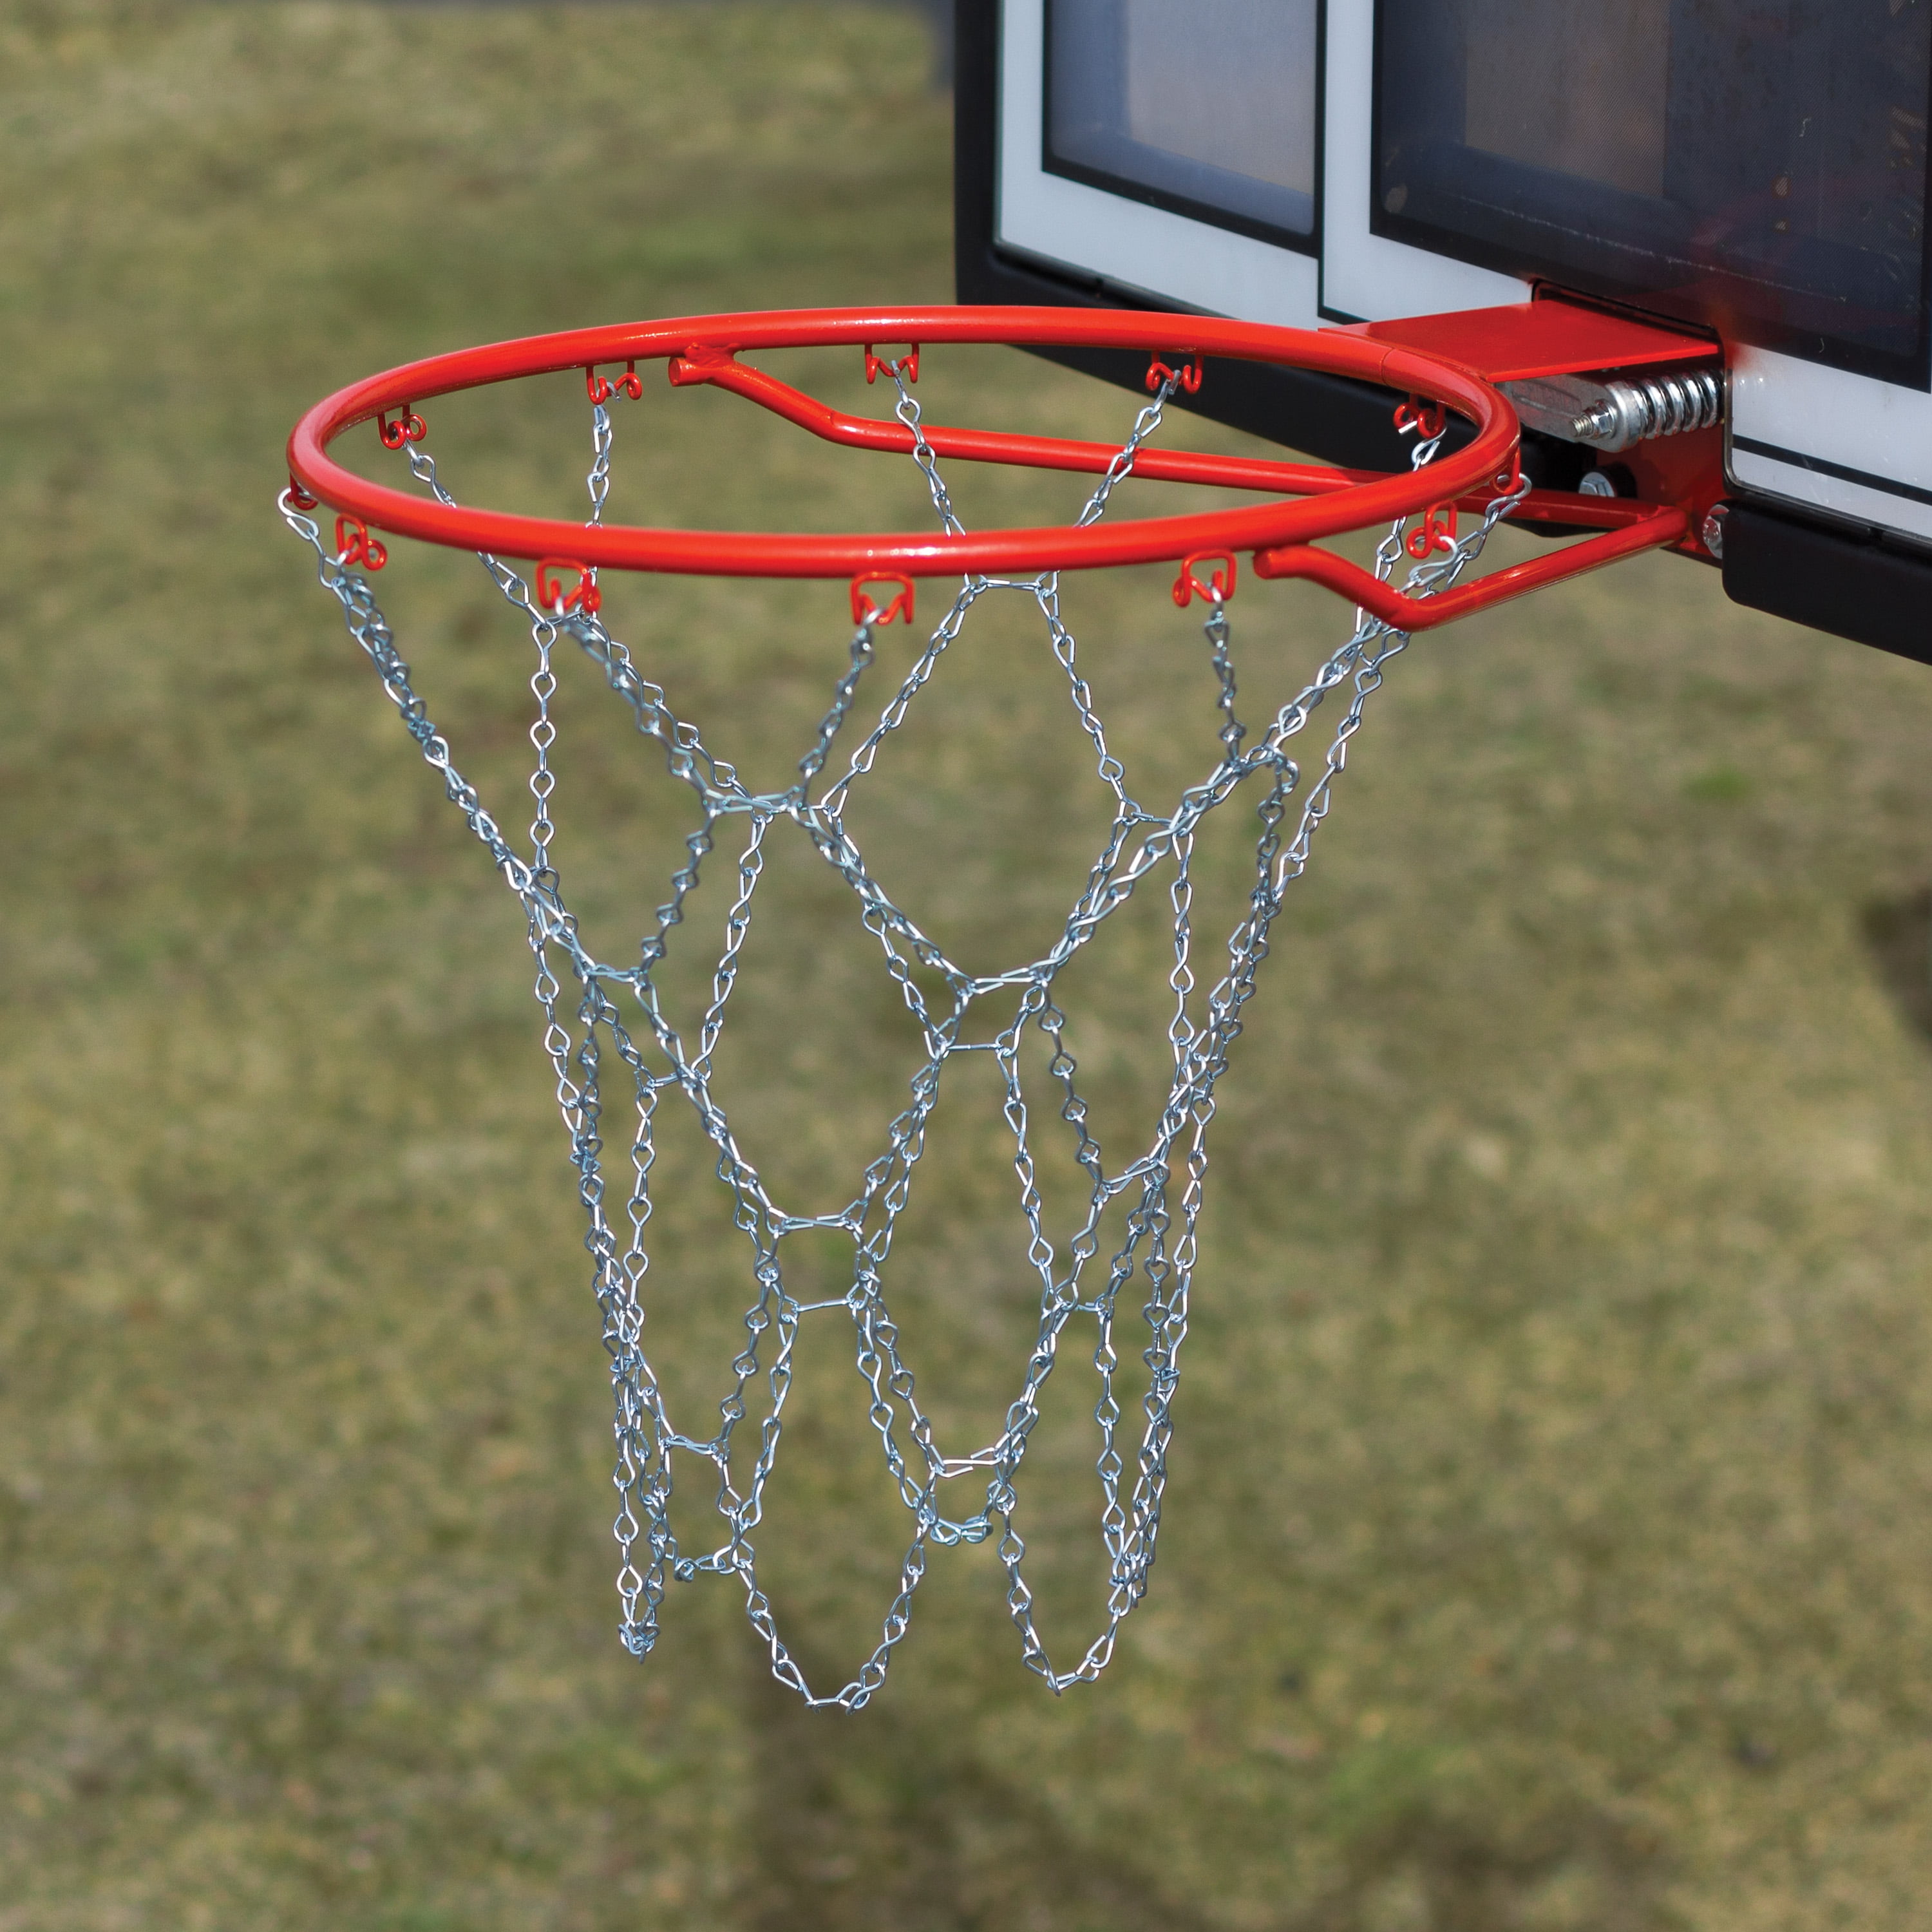 Basketball Chain Net Gold Rare high quality brass plated and polished.. 